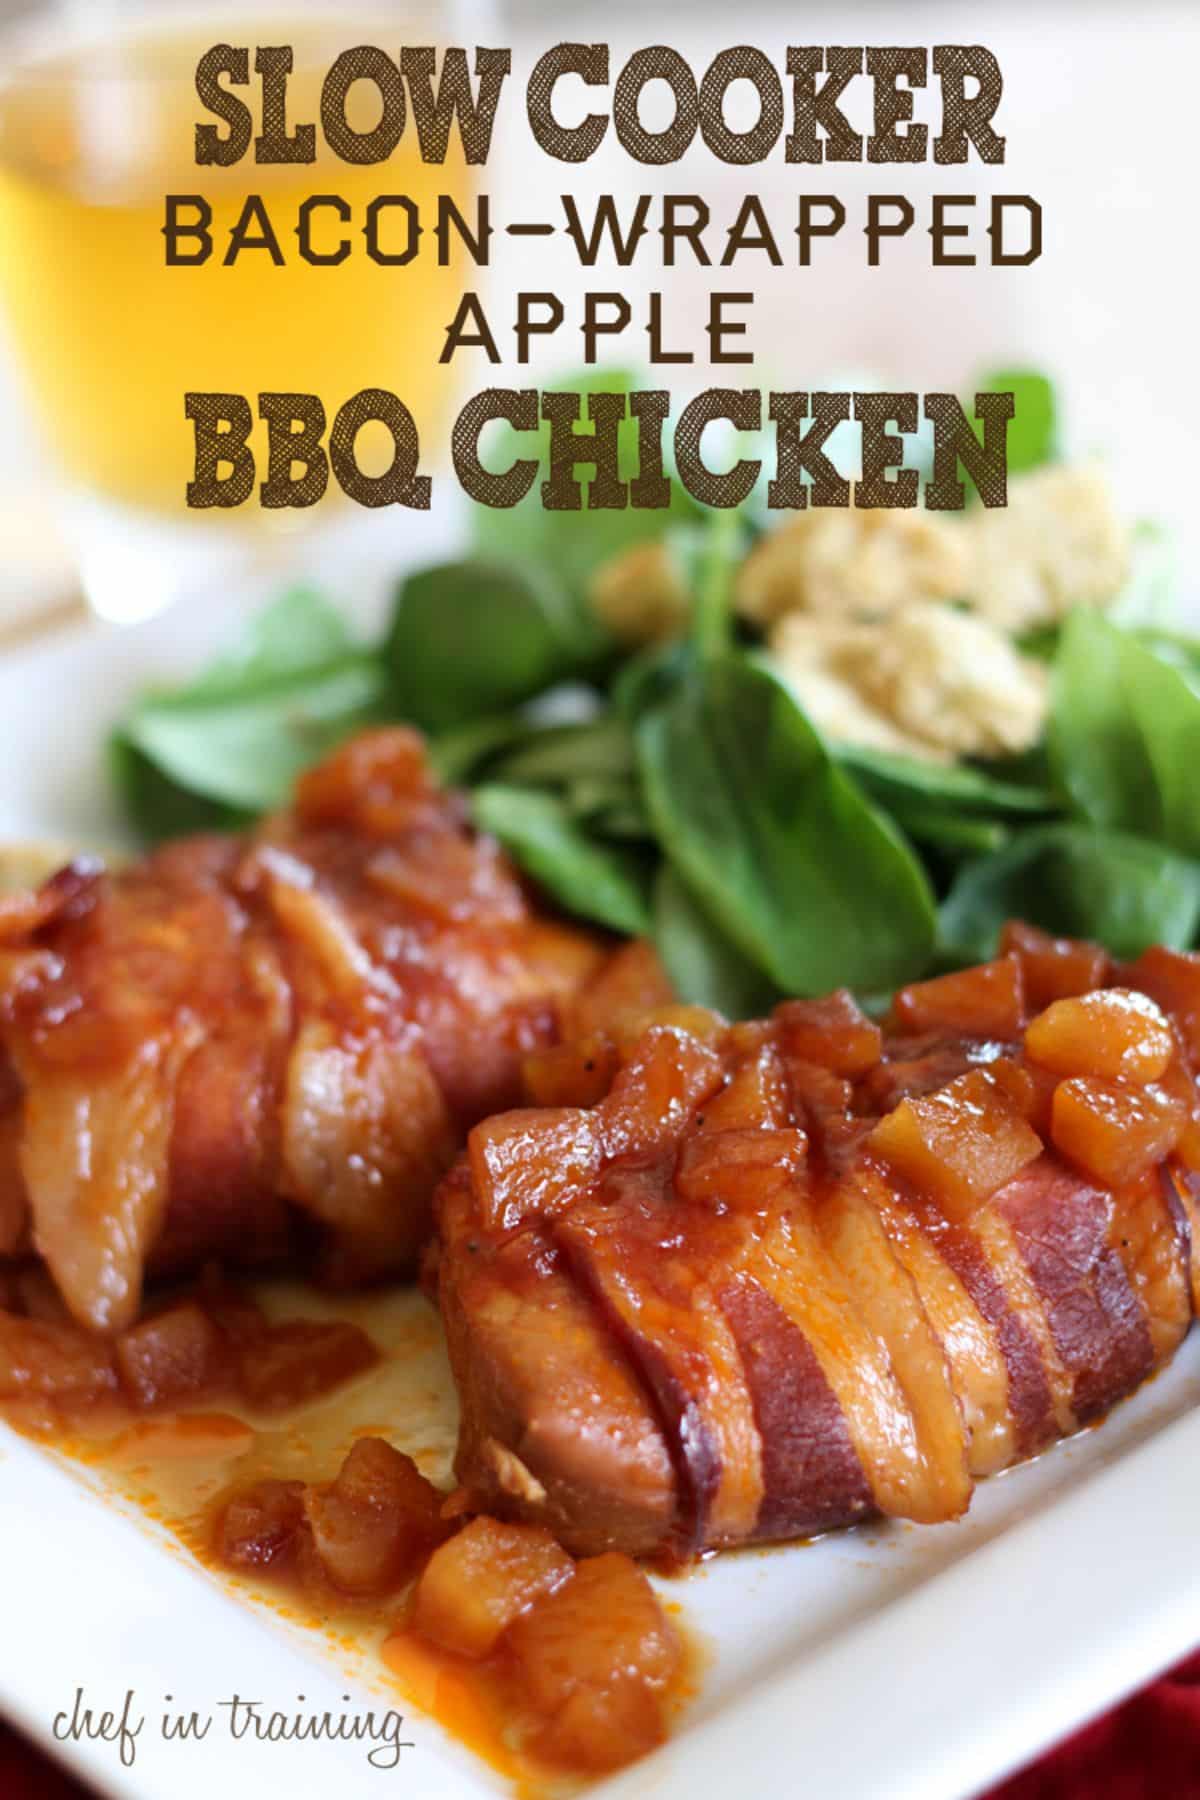 Juicy Slow Cooker Bacon-Wrapped Apple BBQ Chicken on a white plate.